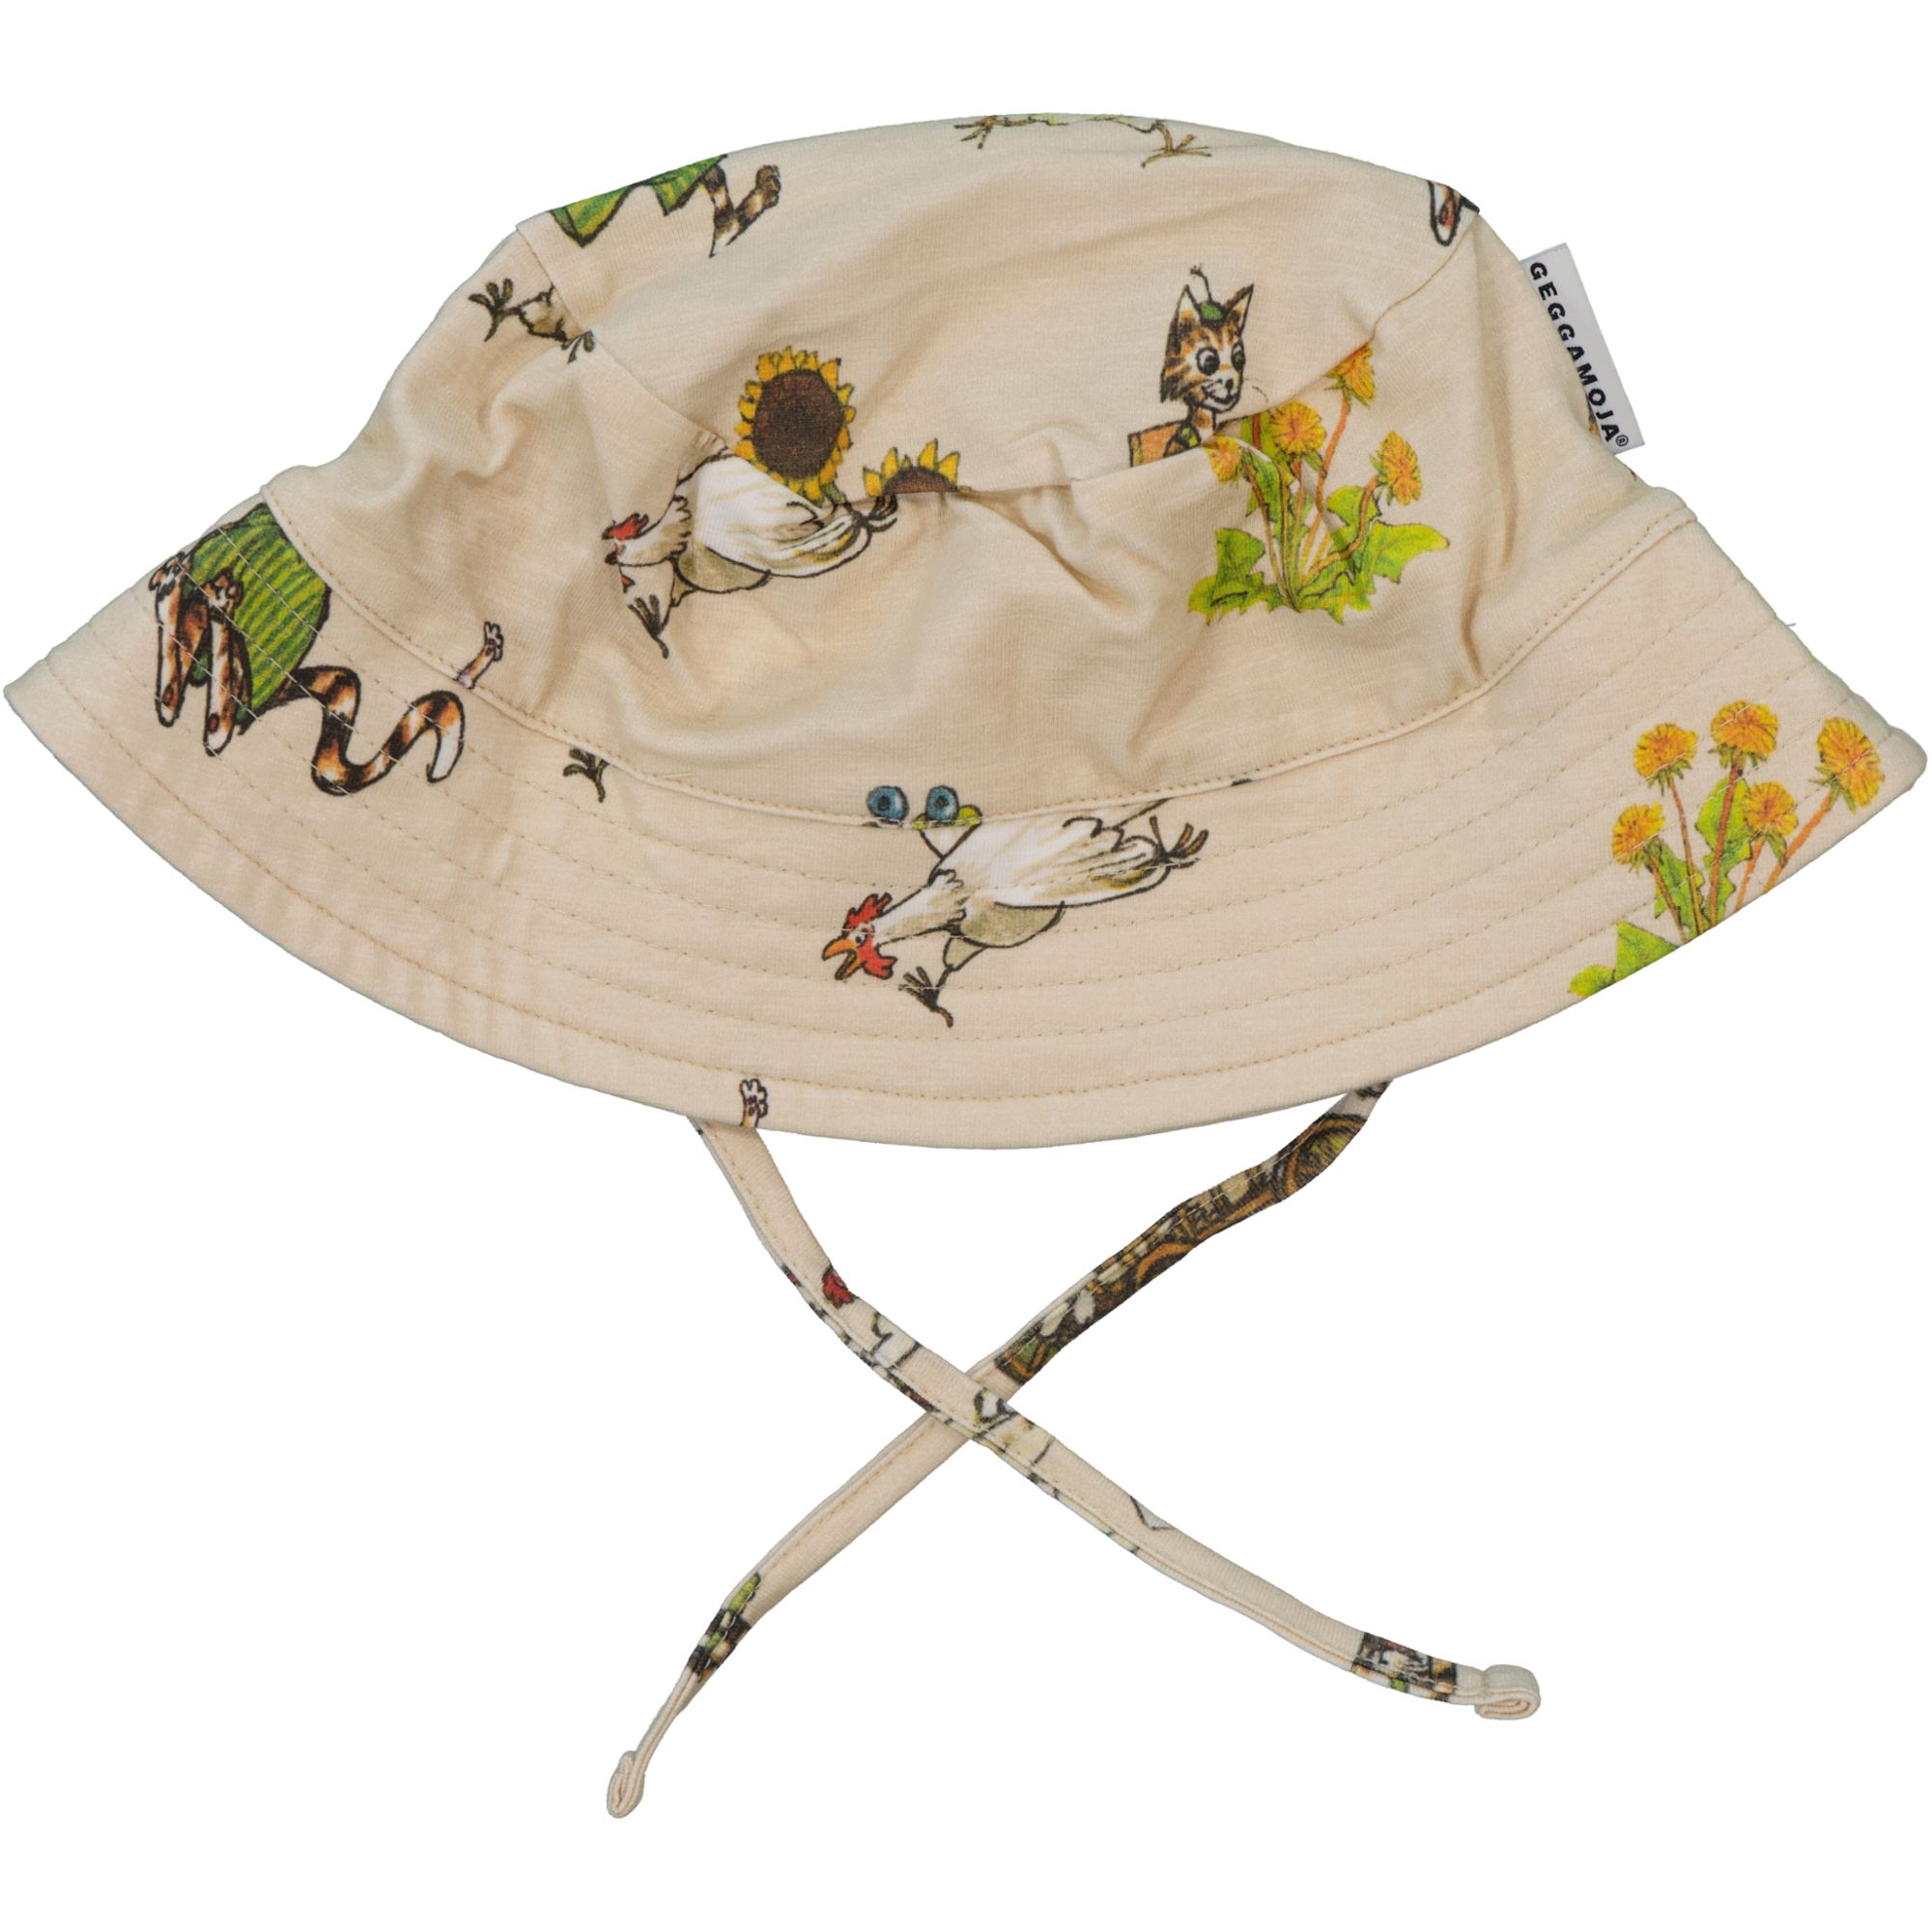 Sunny hat Pettson and Findus Beige